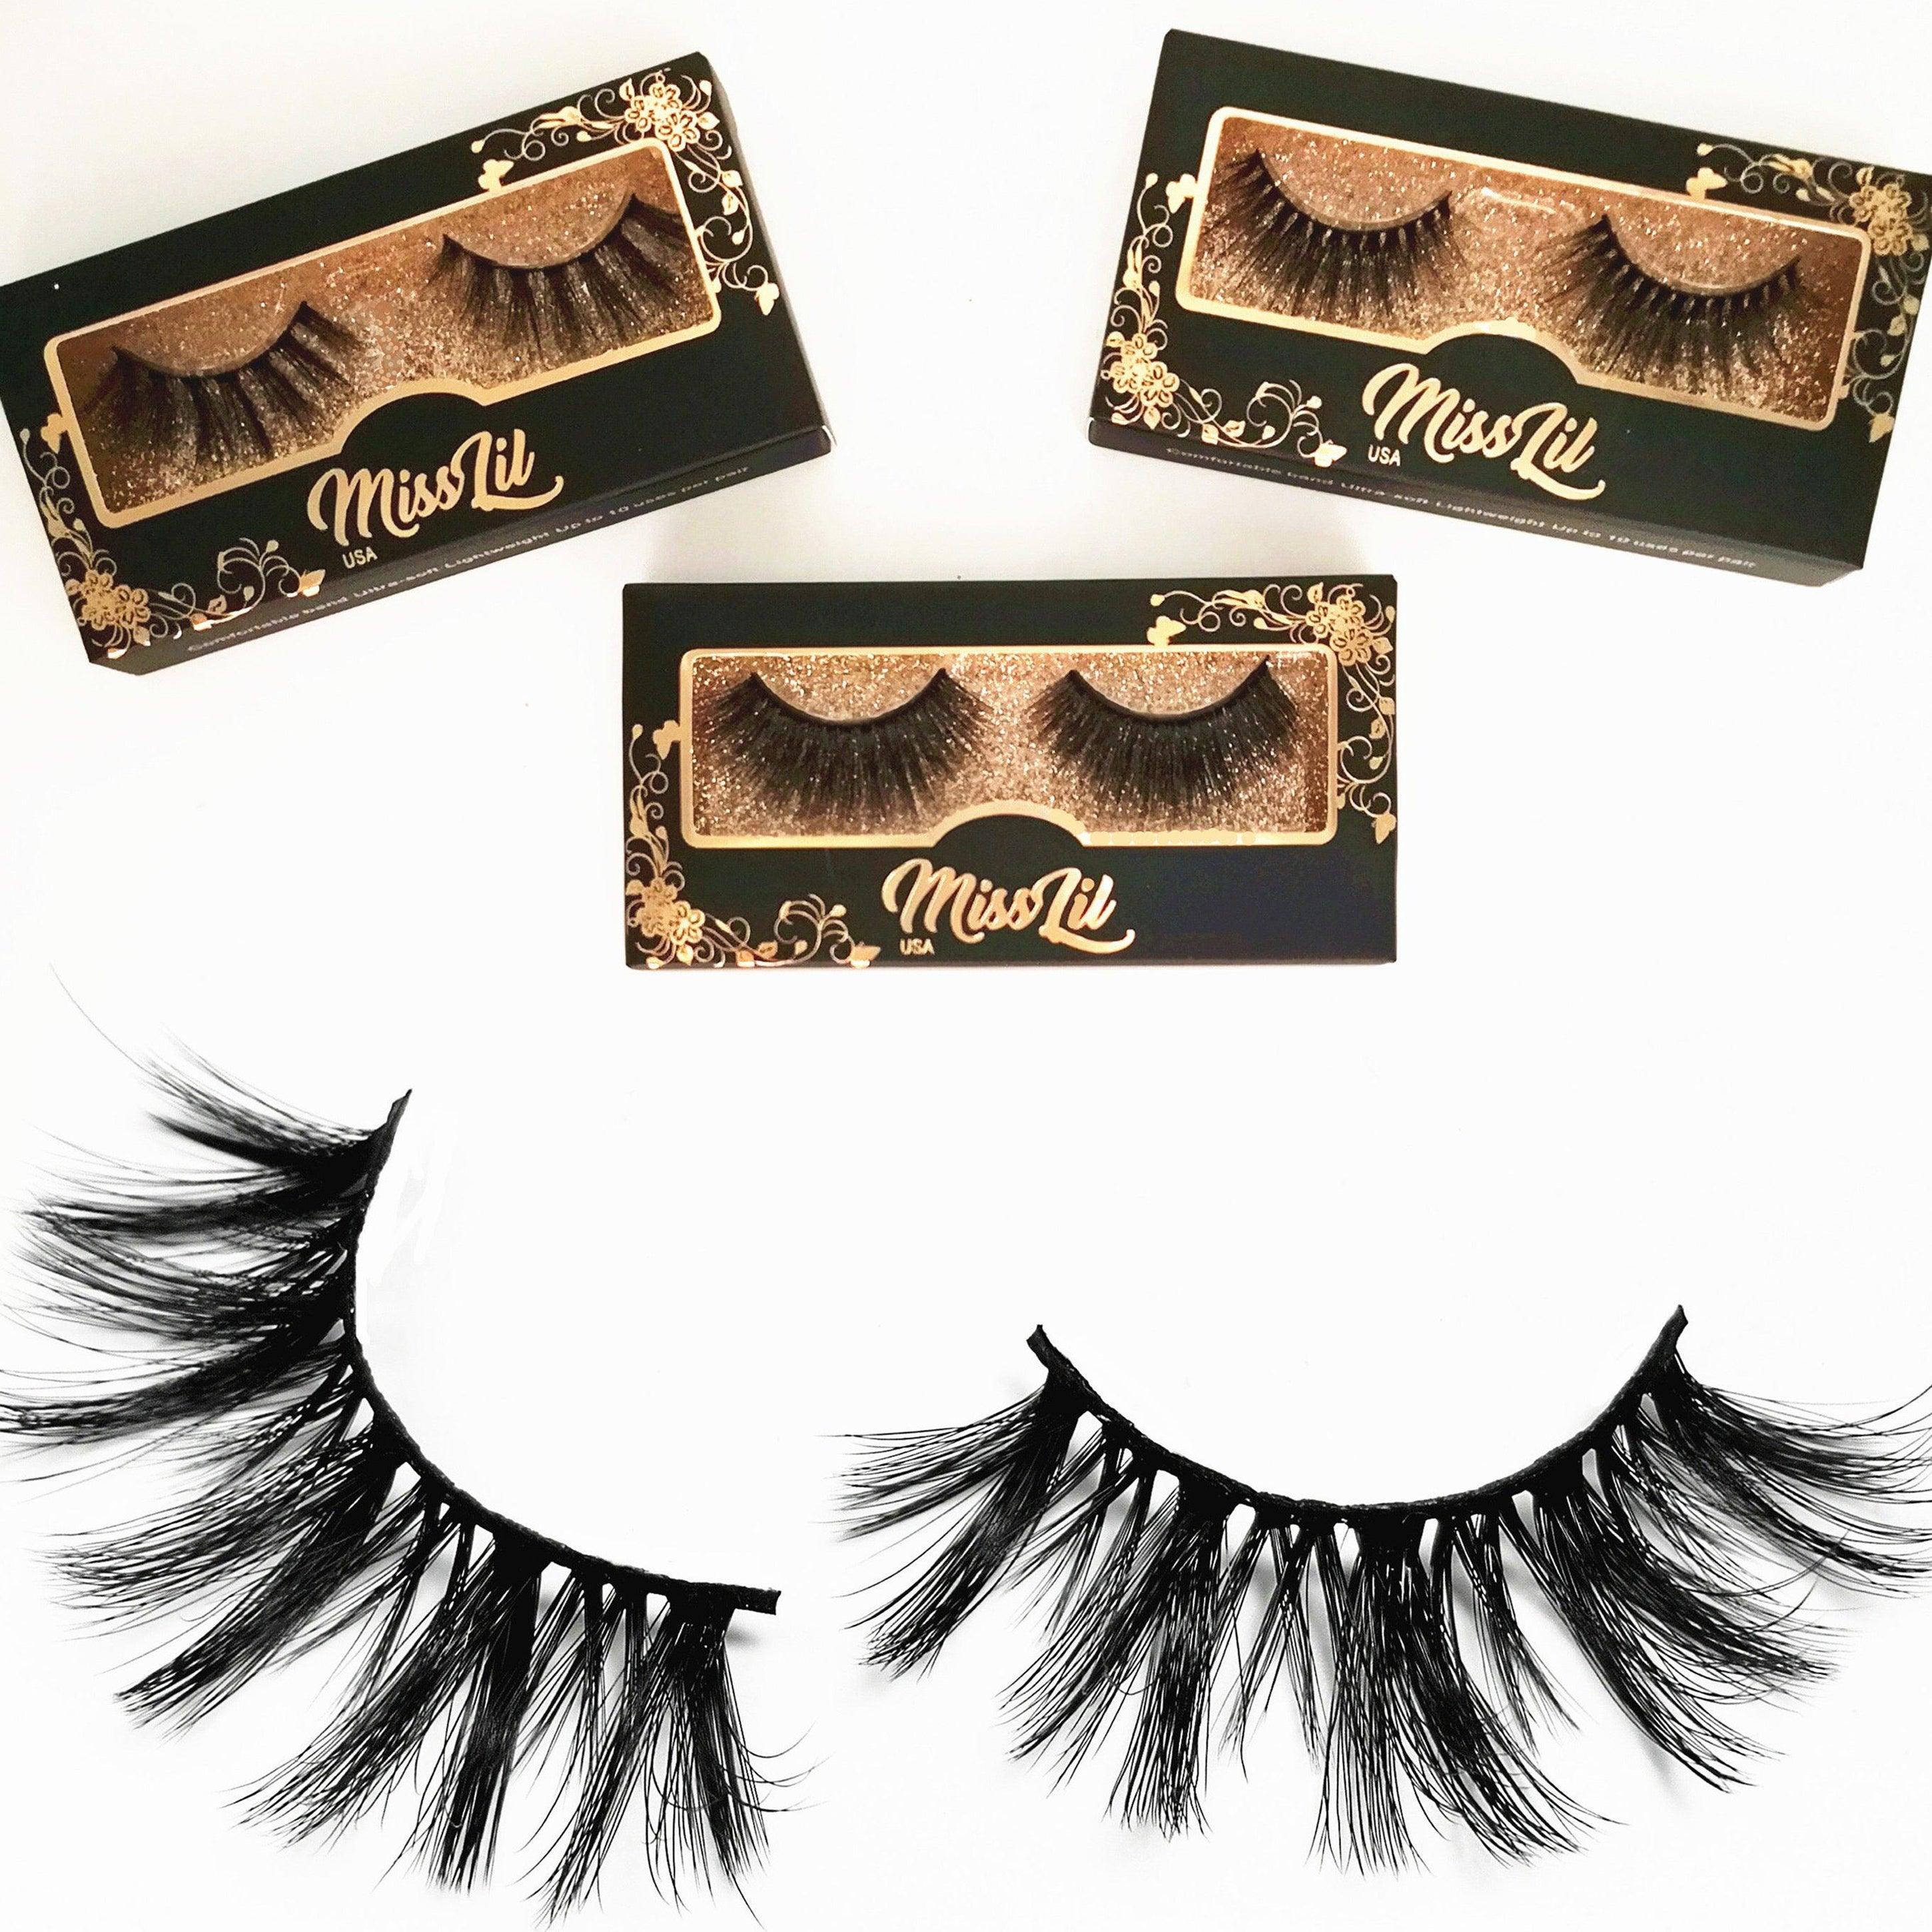 1-Pair Miss Lil USA Lashes #58 (Pack of 12) - Miss Lil USA Wholesale